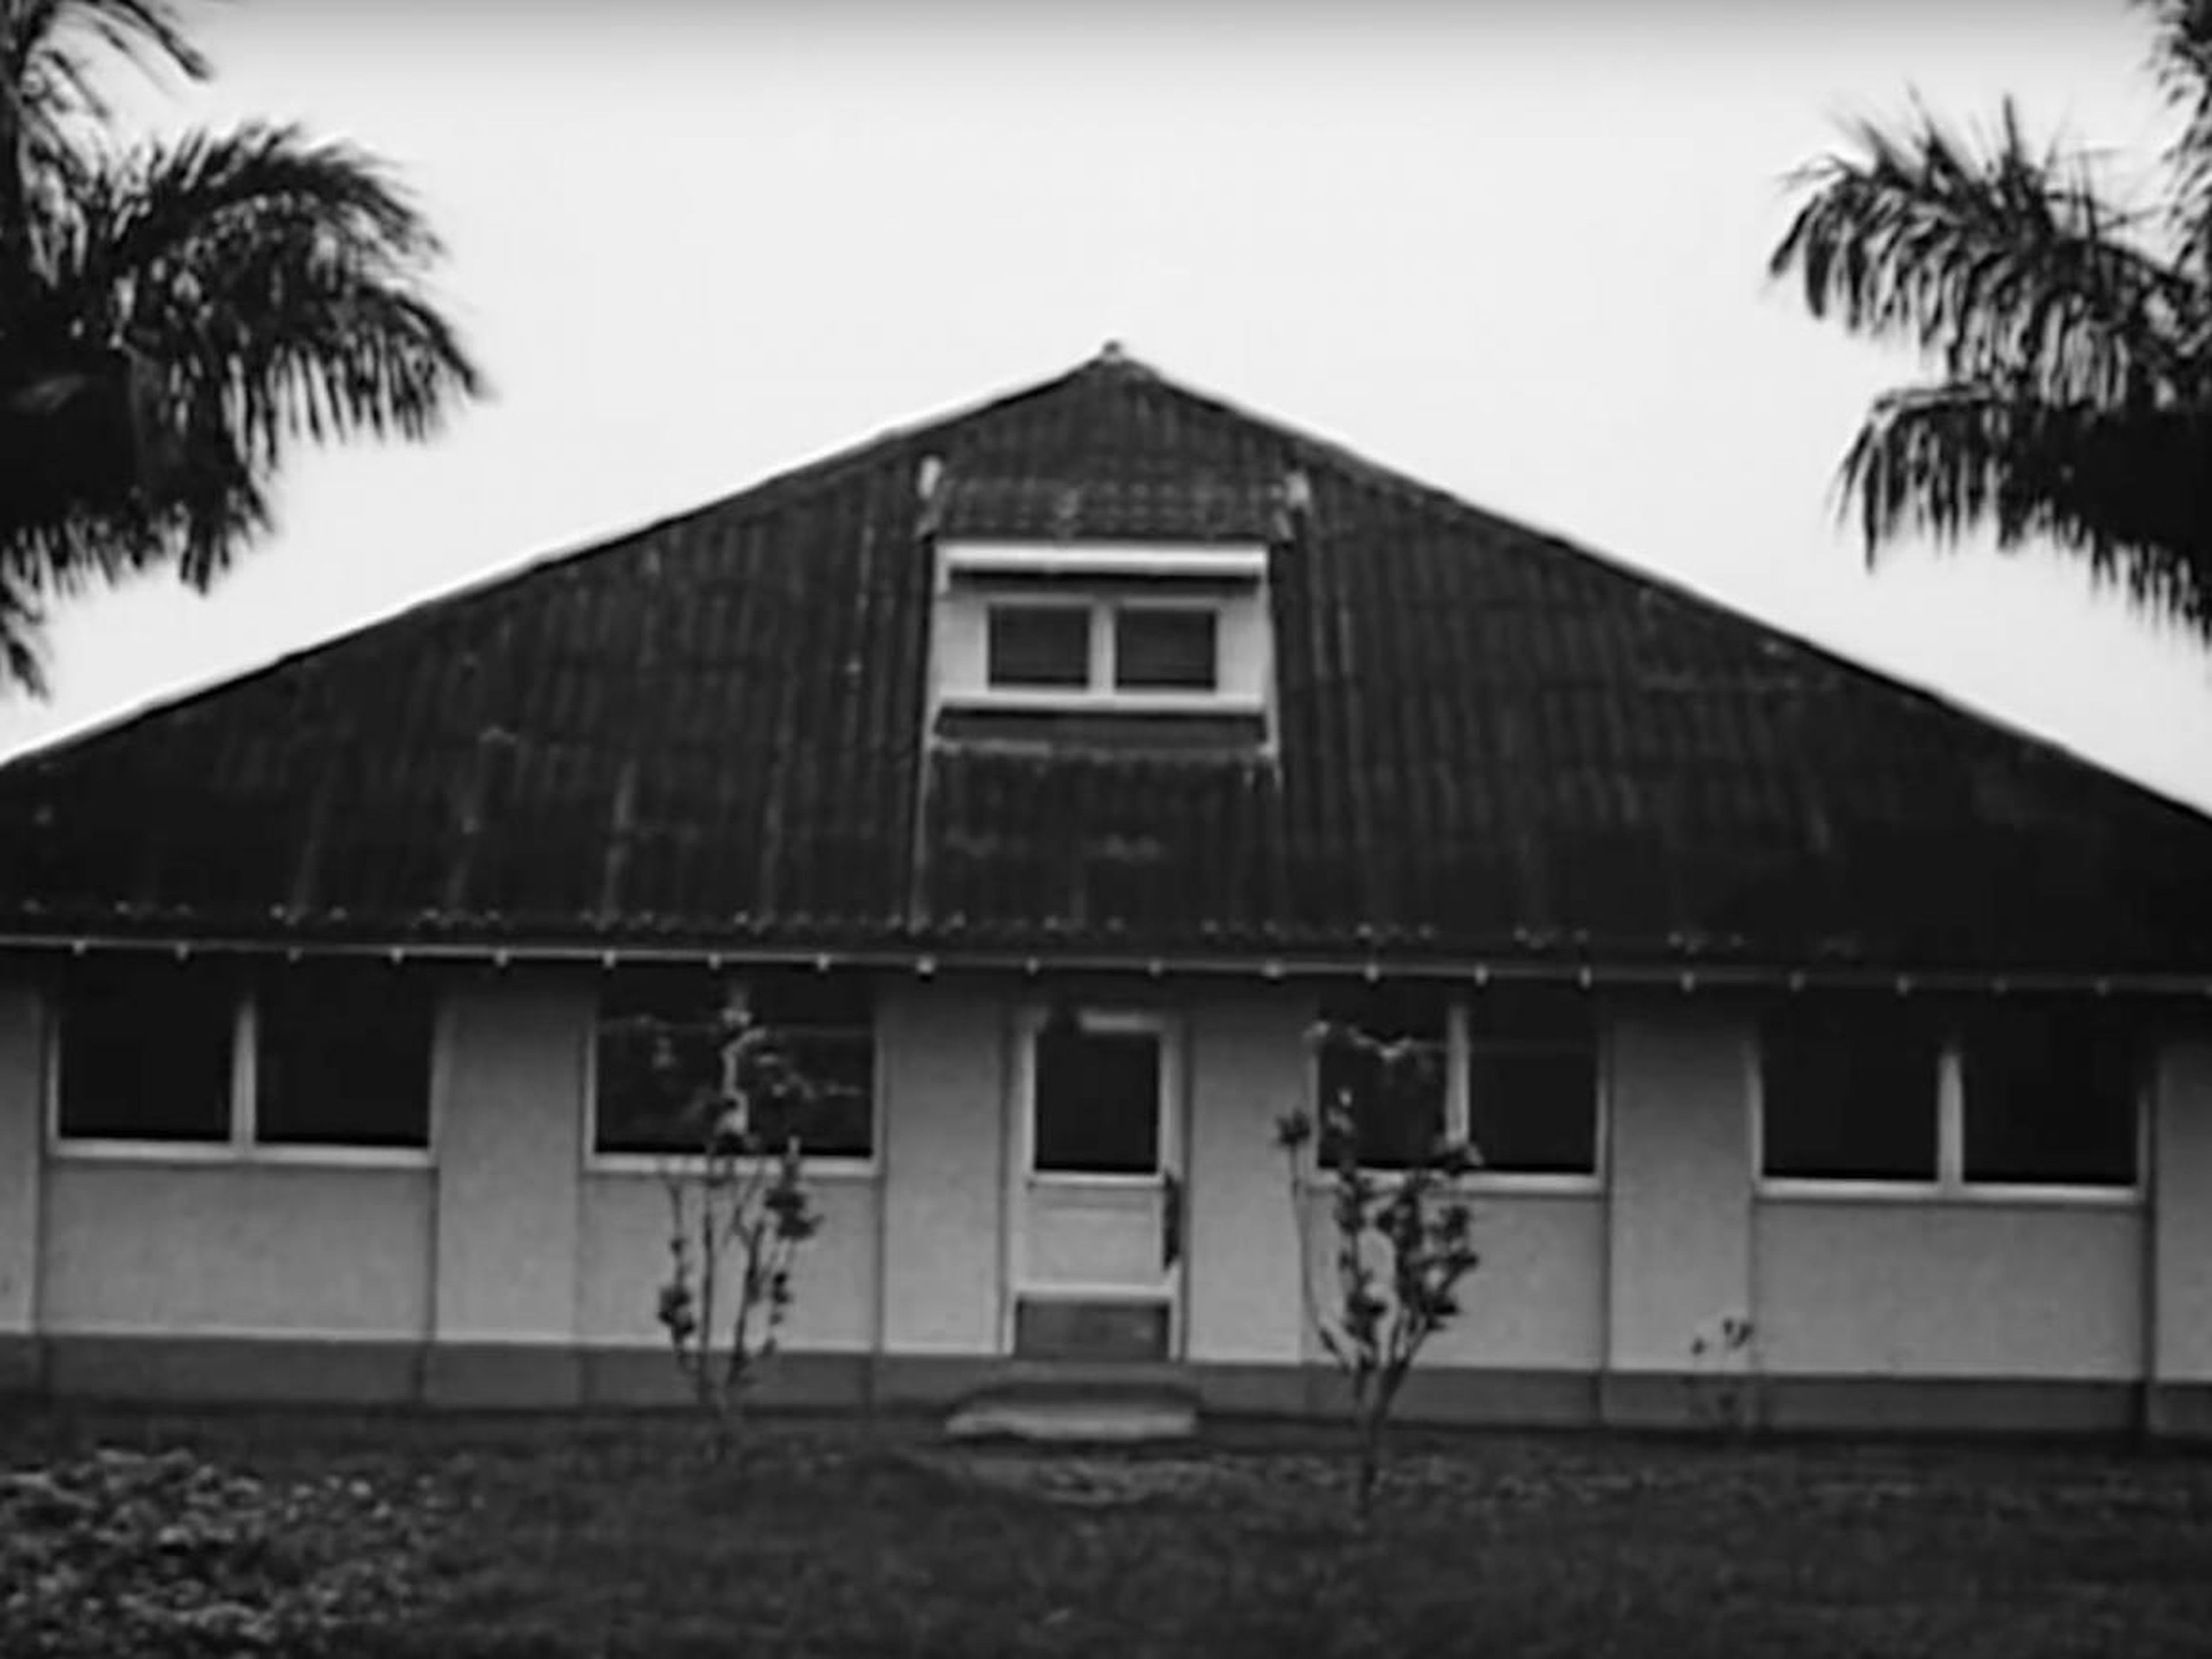 A Midwestern-style structure in Fordlandia.